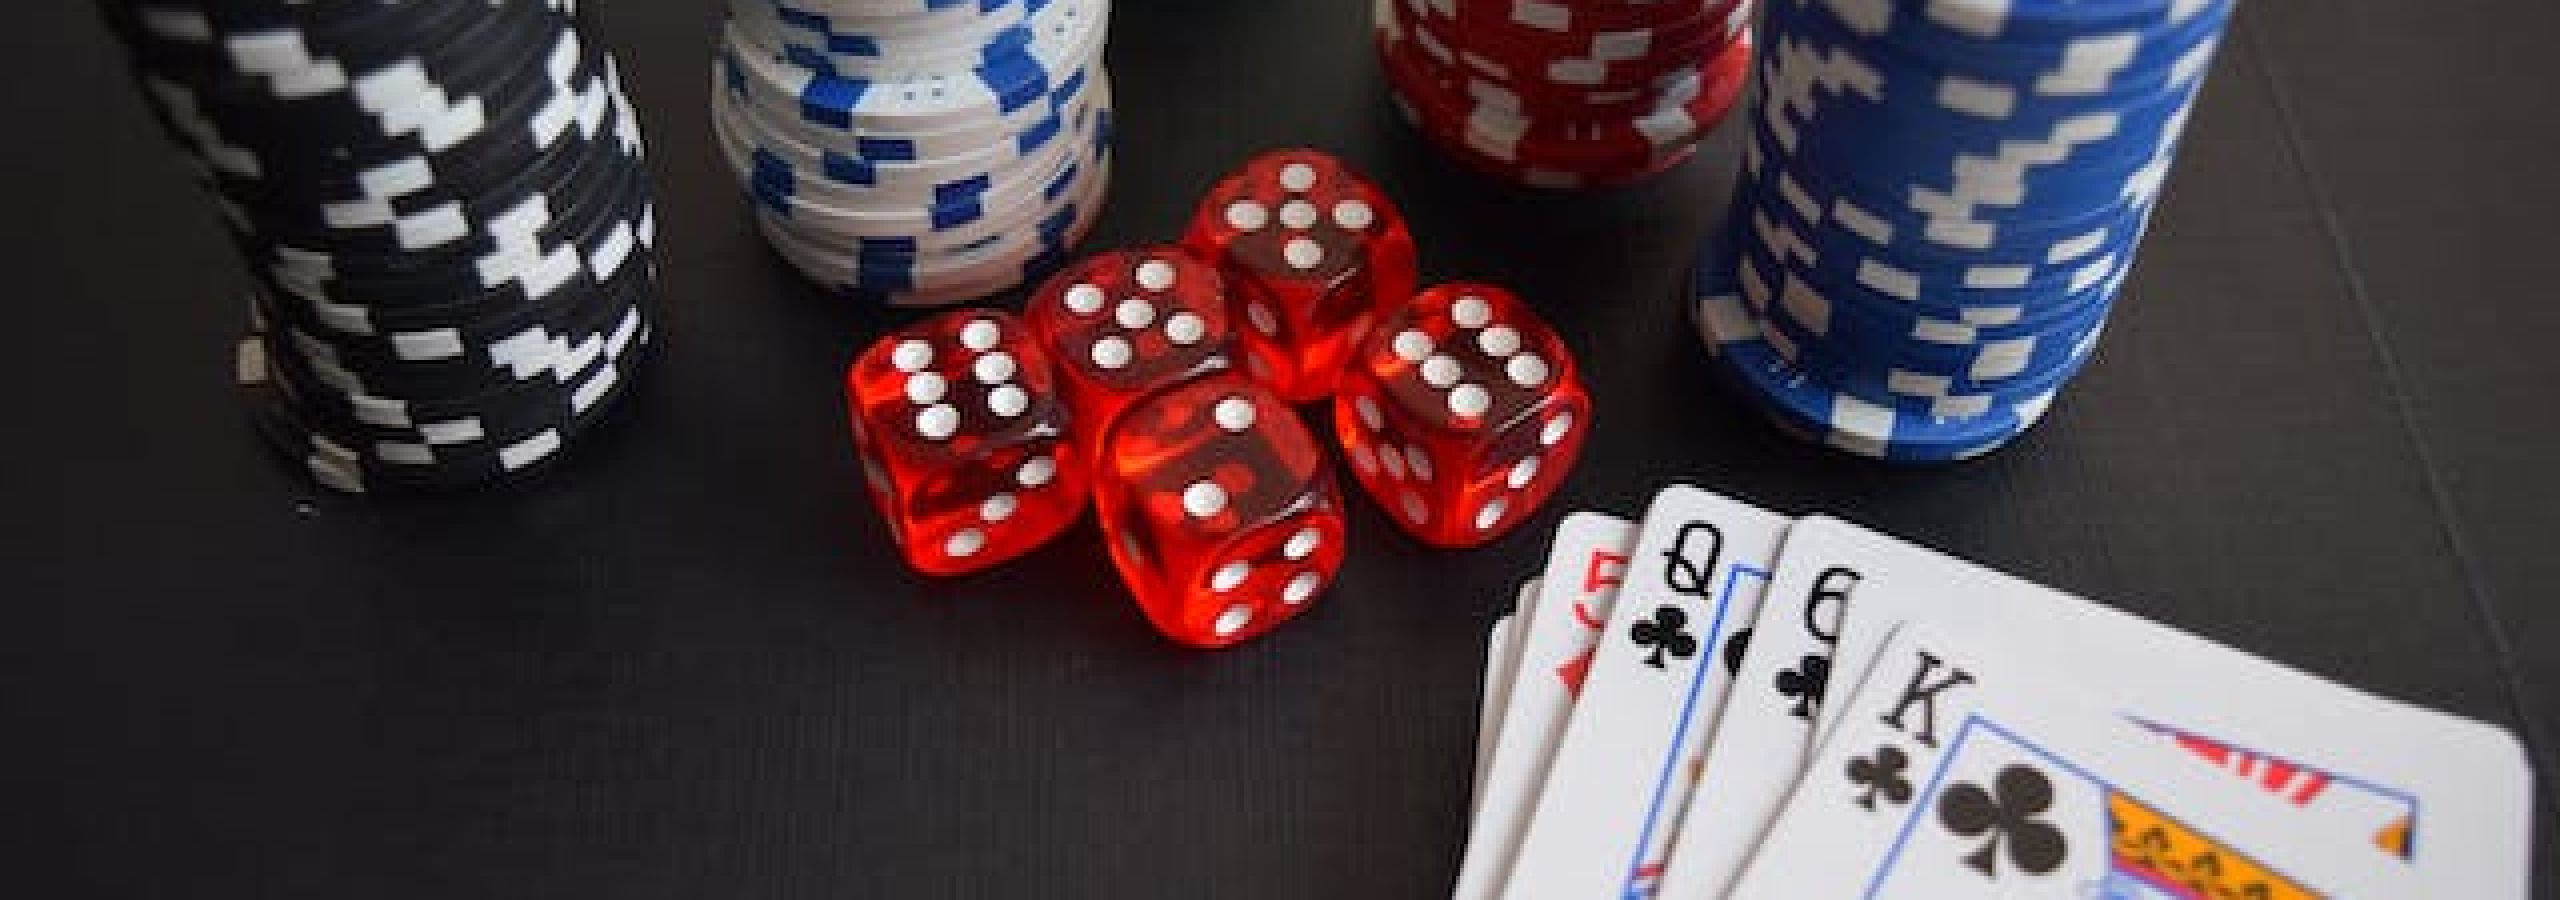 photo of chips and dice at casino